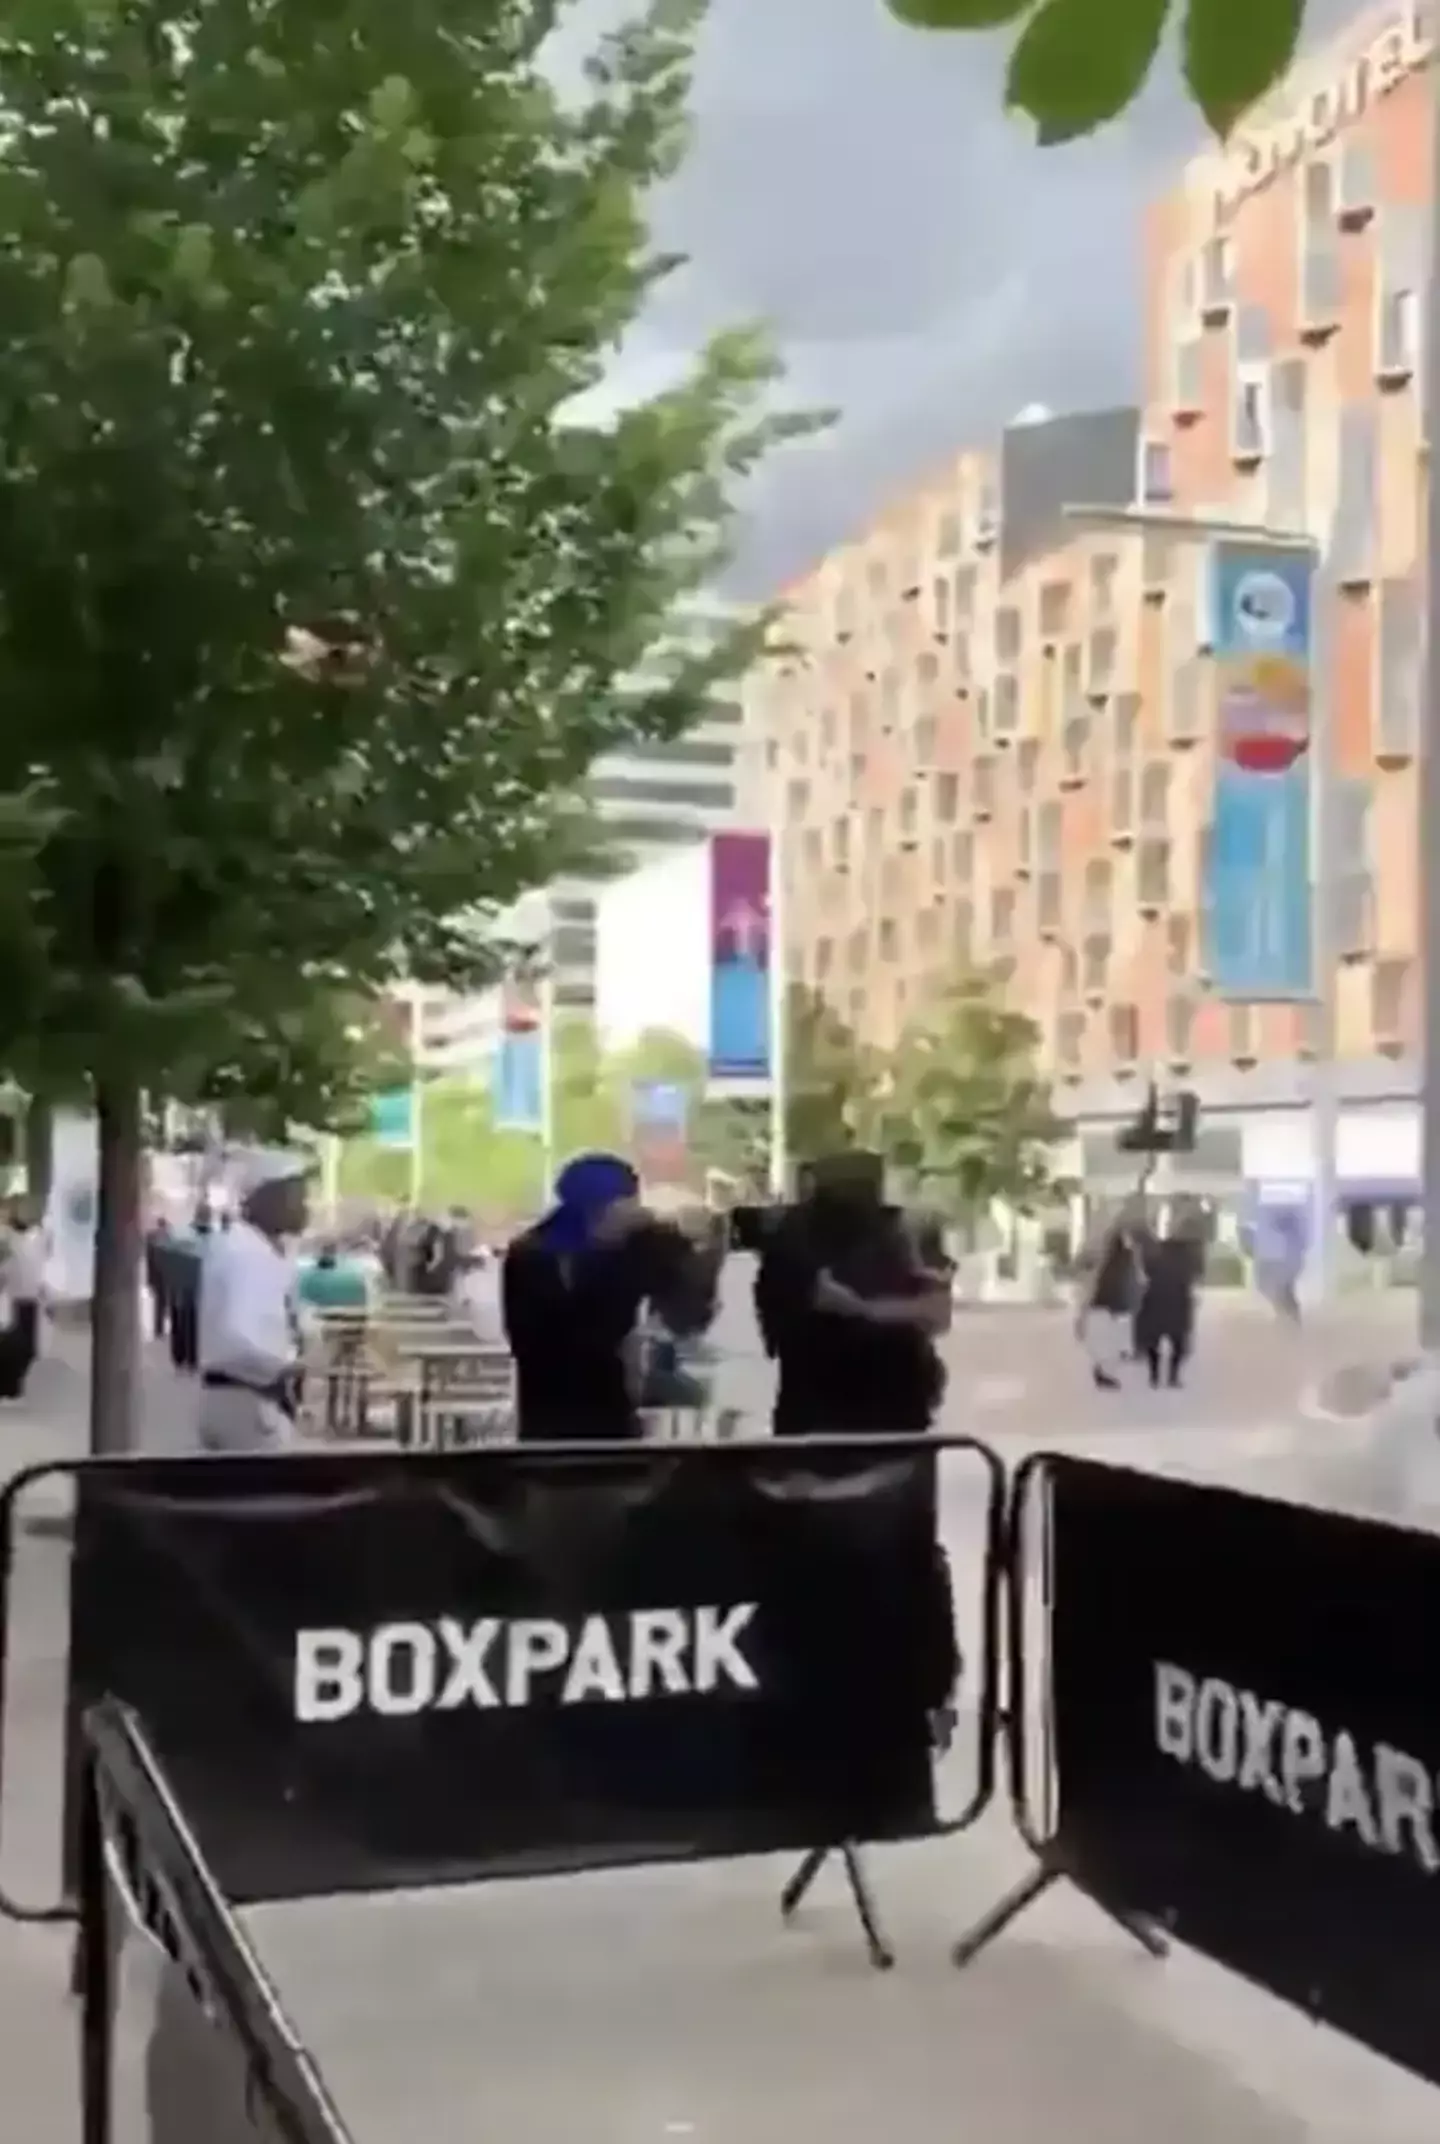 Footage of the scary incident shows the former boxer knocking-out a man wearing a blue durag.